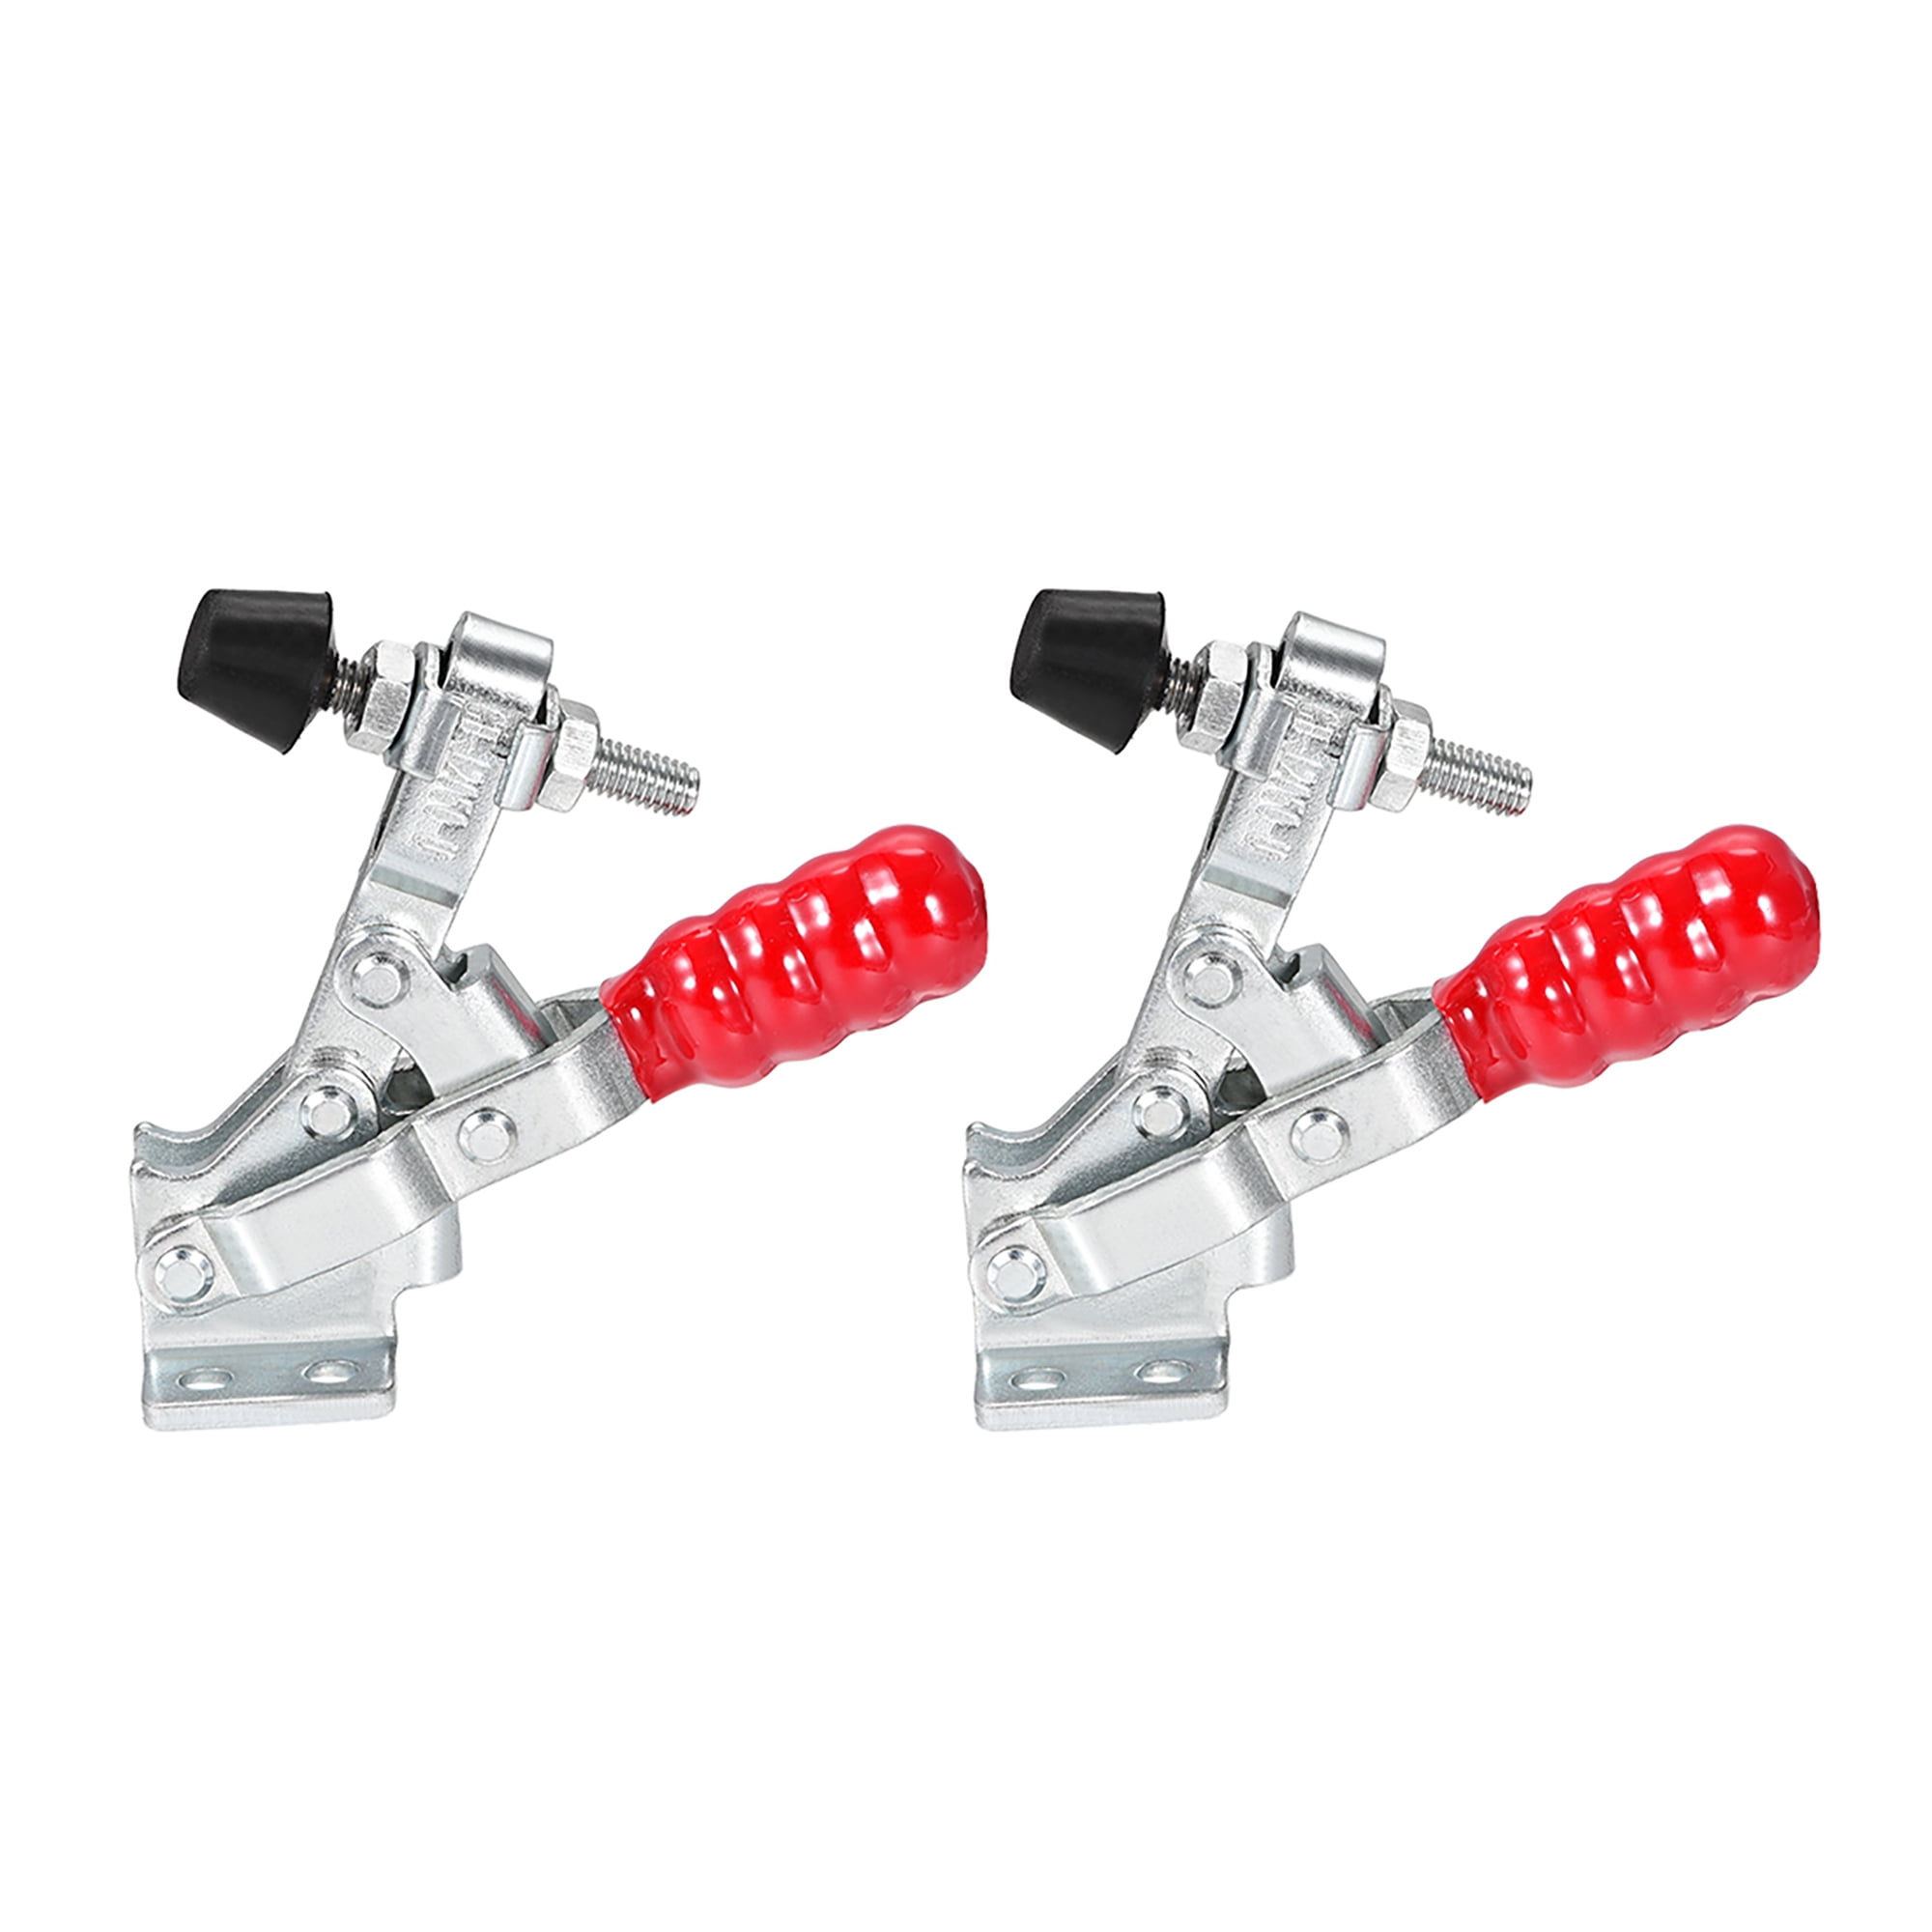 Details about   2 Pack Hand Tool Vertical Toggle Clamp Quick Release Clamp 200 lbs/91kg 